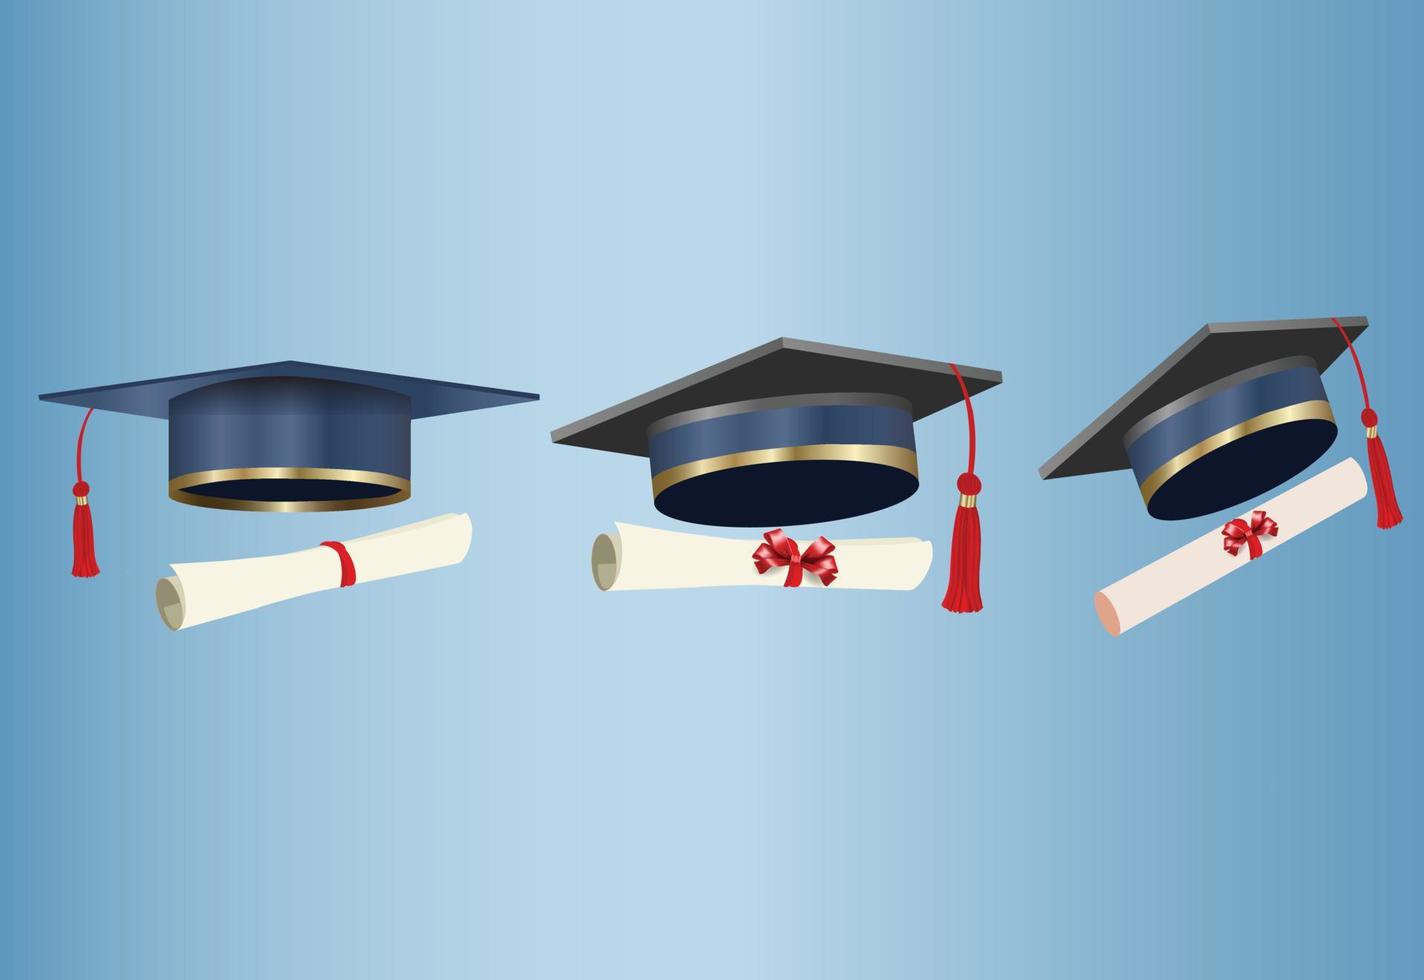 realistic graduate caps background with vector Design